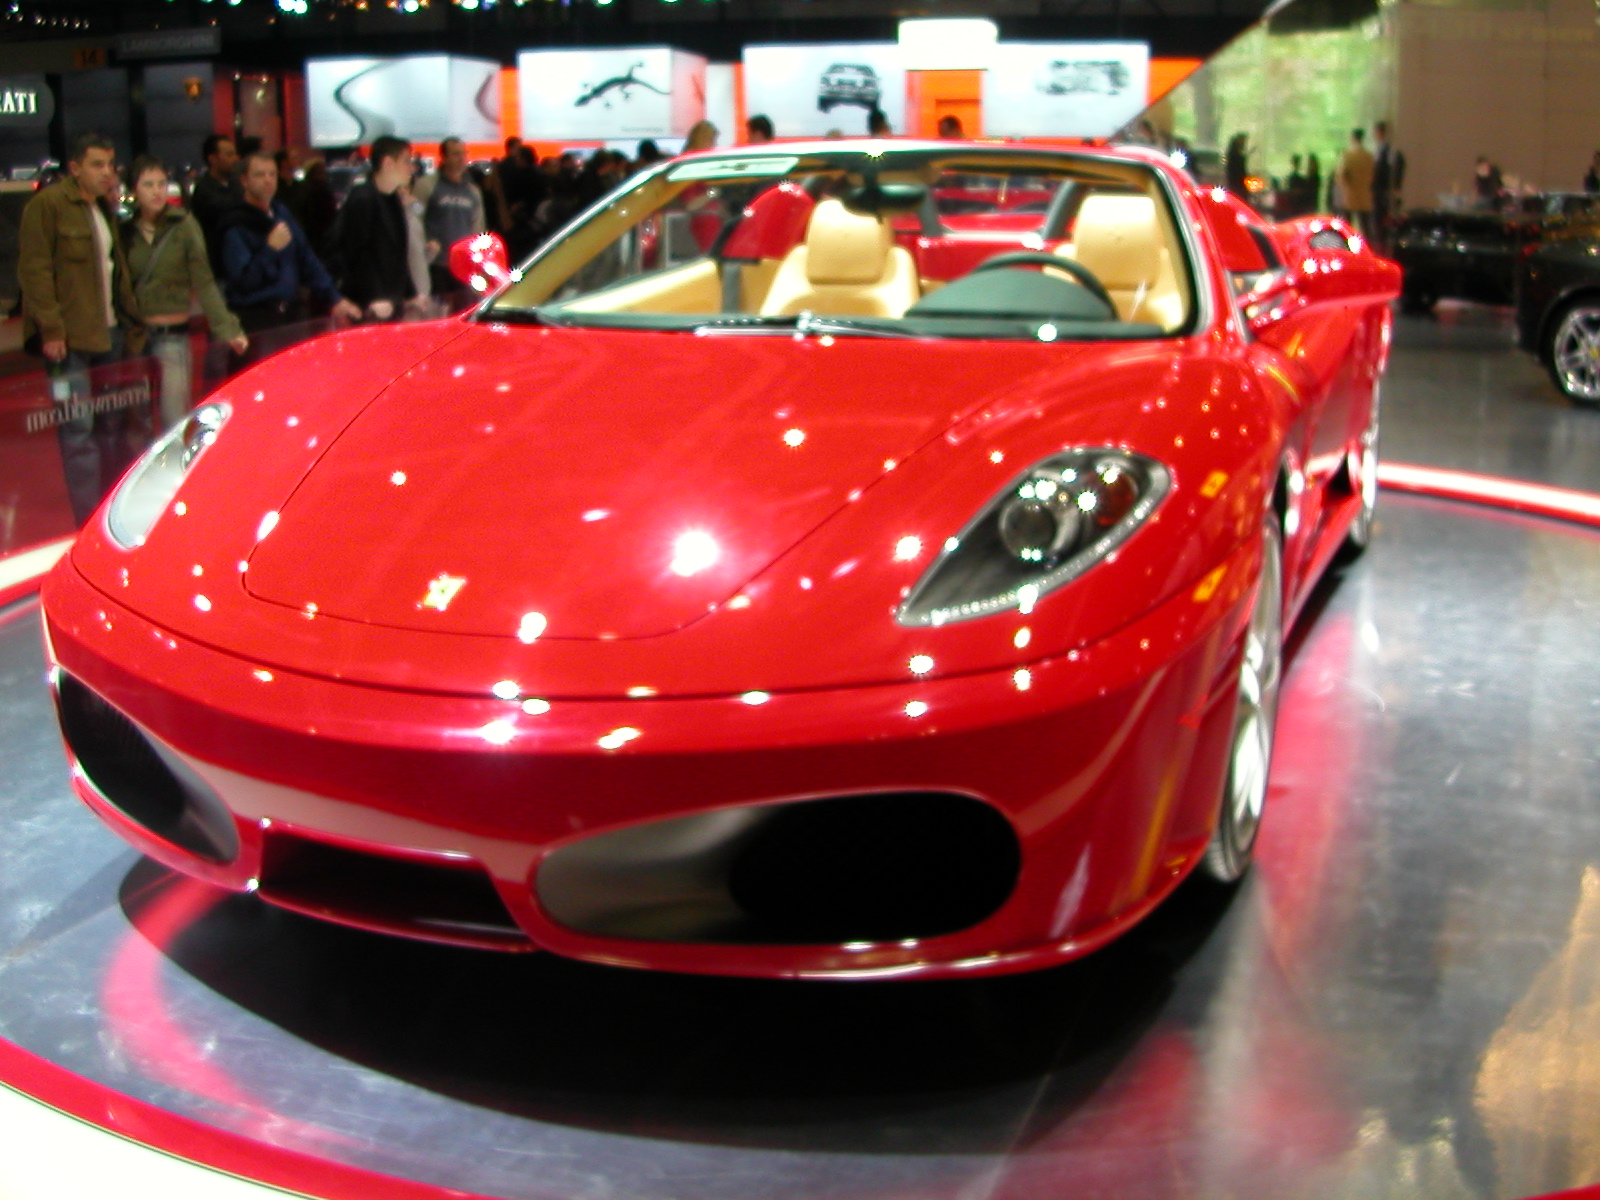 a red car on display at a showroom with people looking